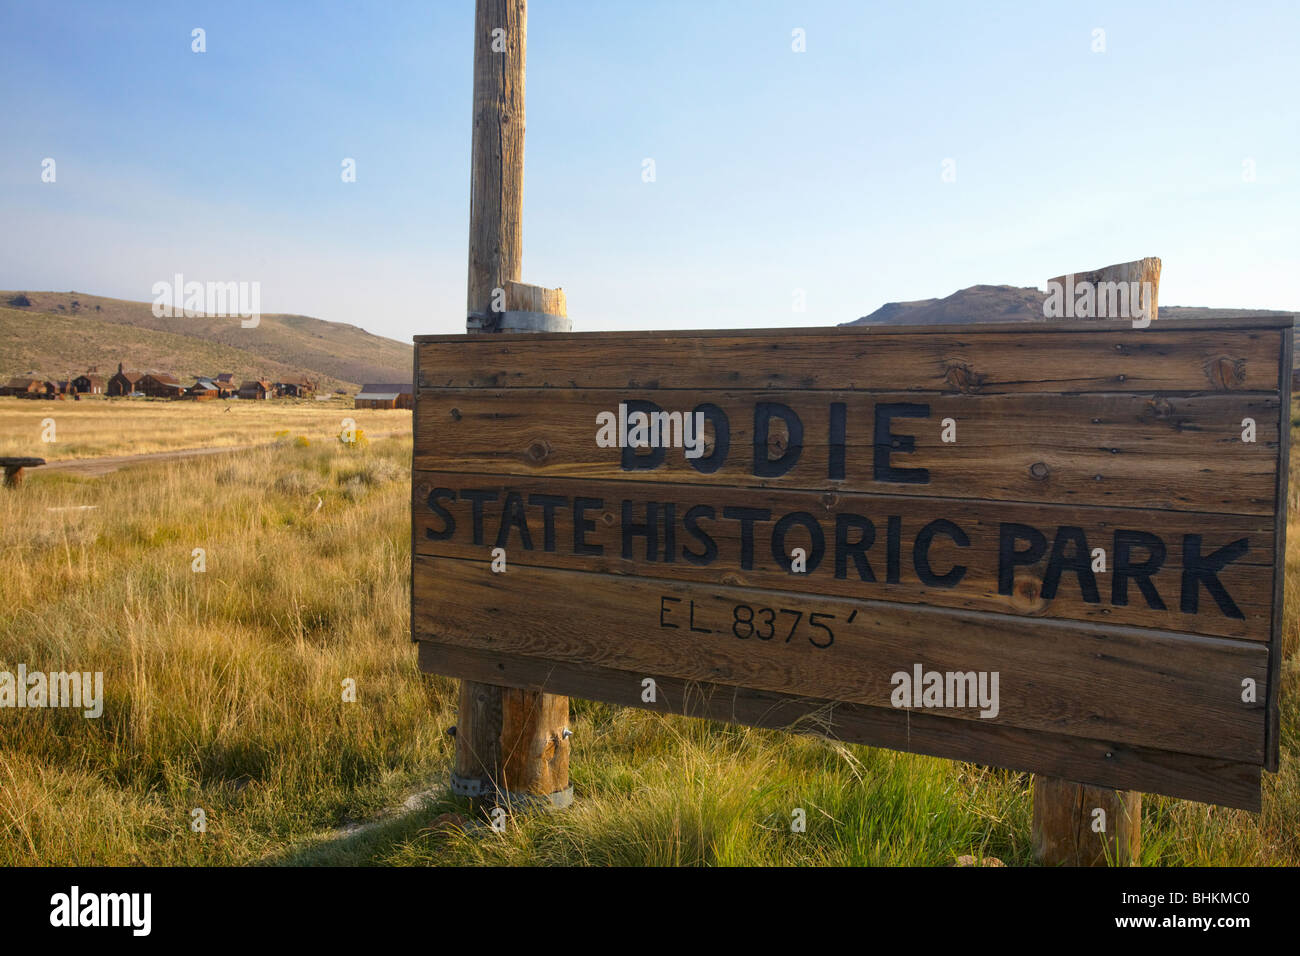 Close Up View of the Entrance Sign to Bodie, California Stock Photo